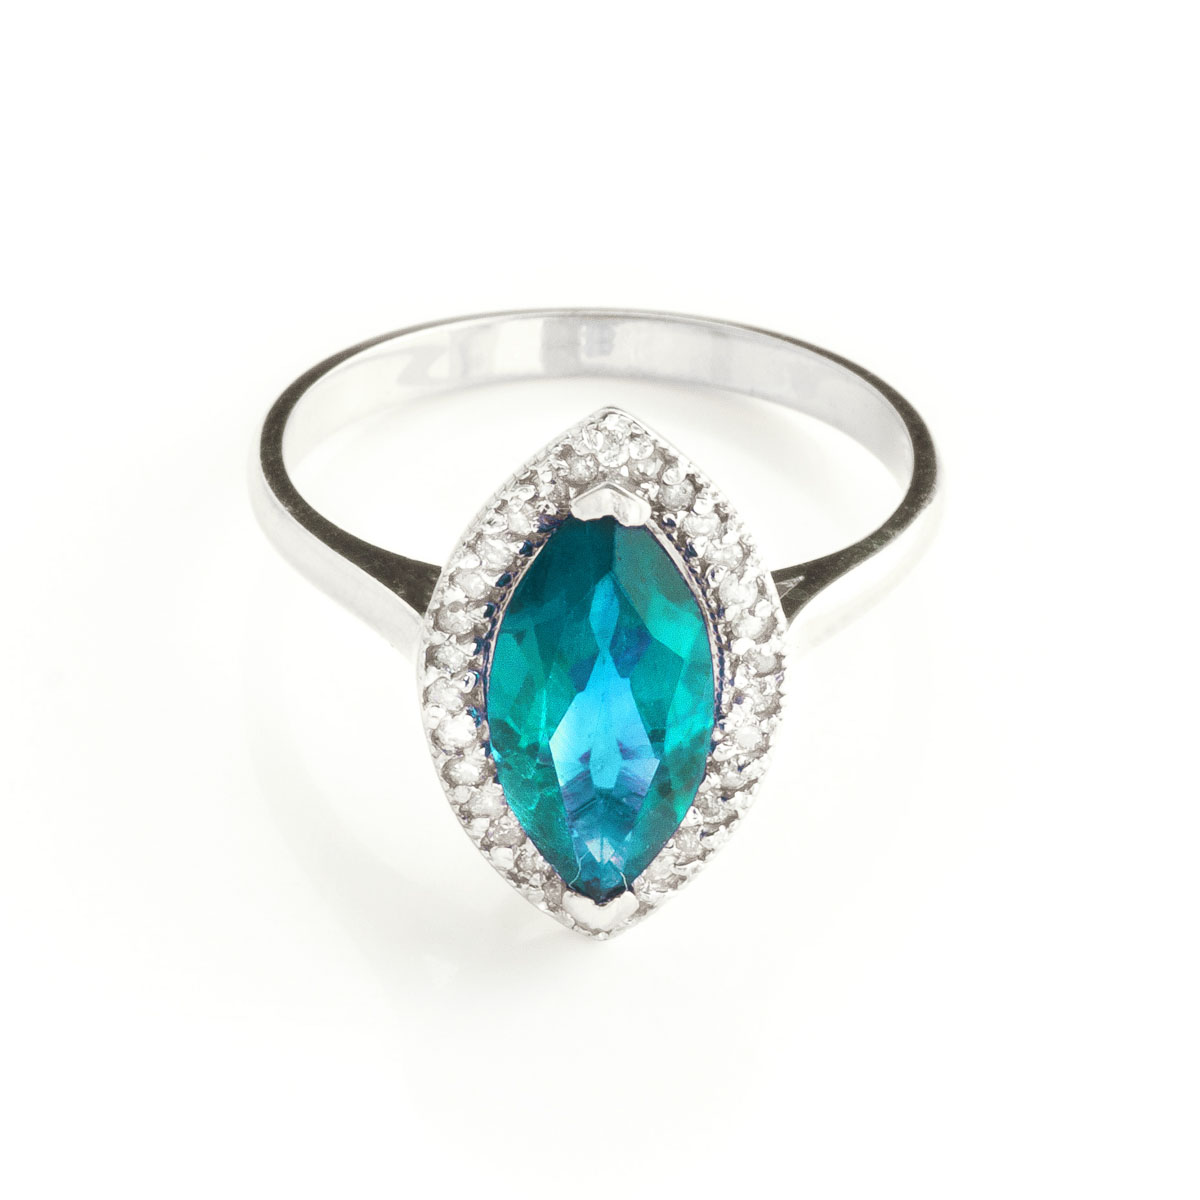 Blue Topaz Halo Ring 2.4 ctw in 18ct White Gold